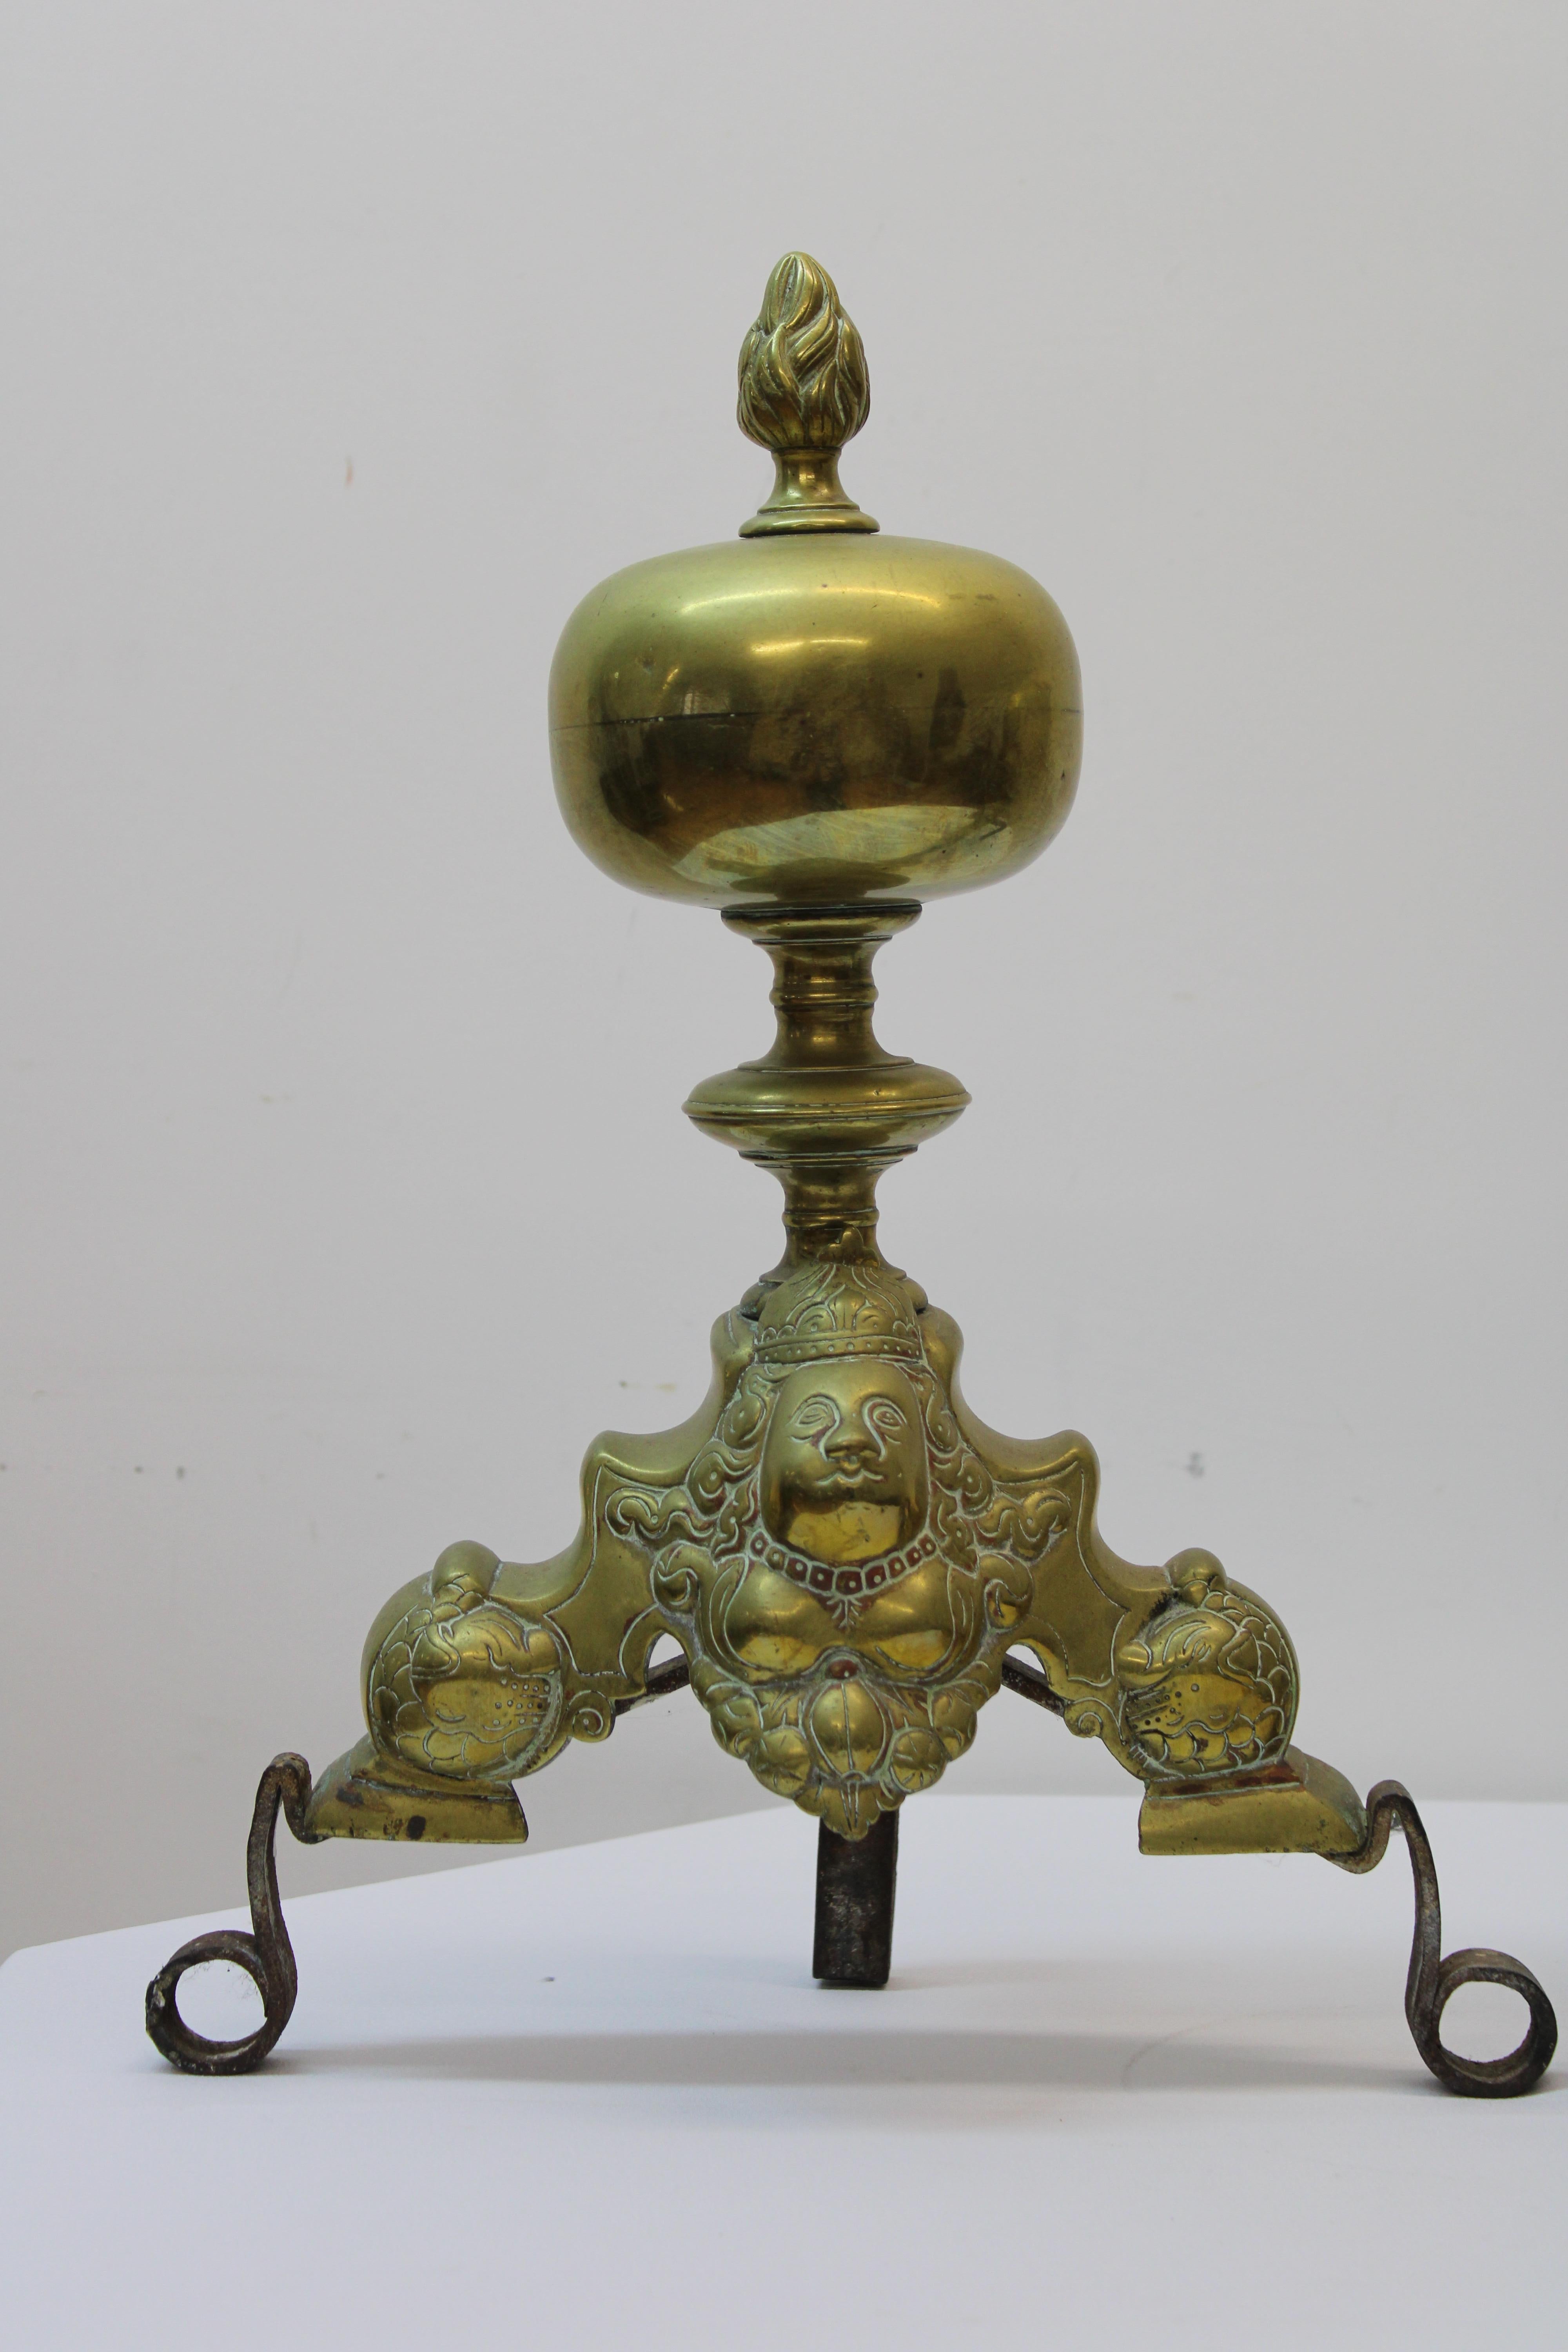 C. late 18th century - early 19th century

European engraved brass Andirons.